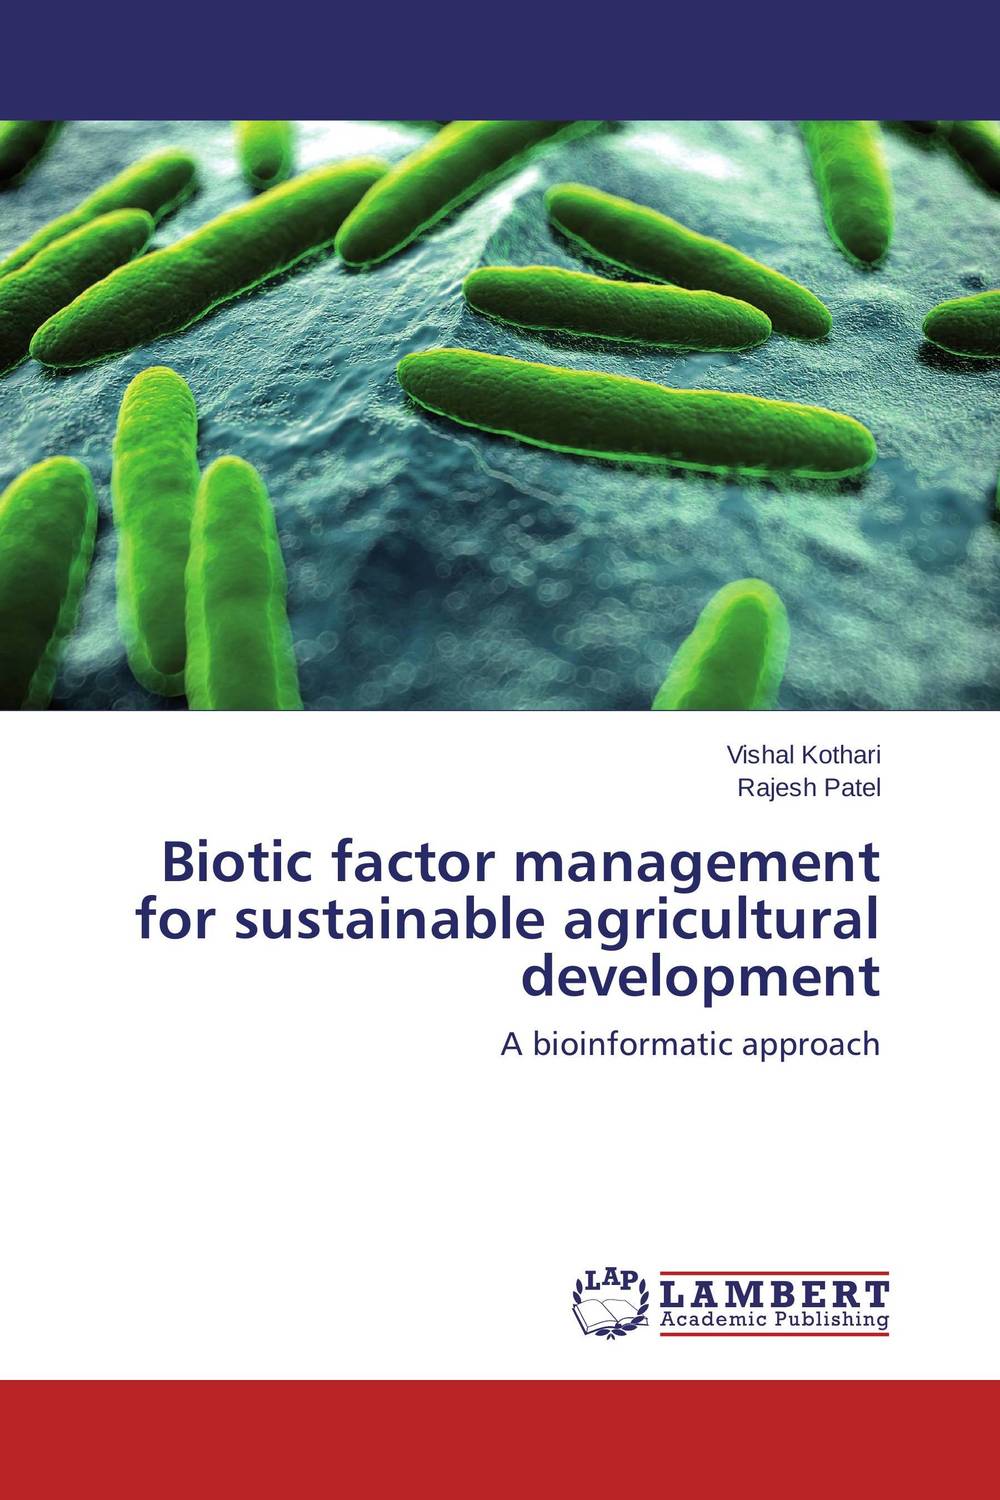 Biotic factor management for sustainable agricultural development